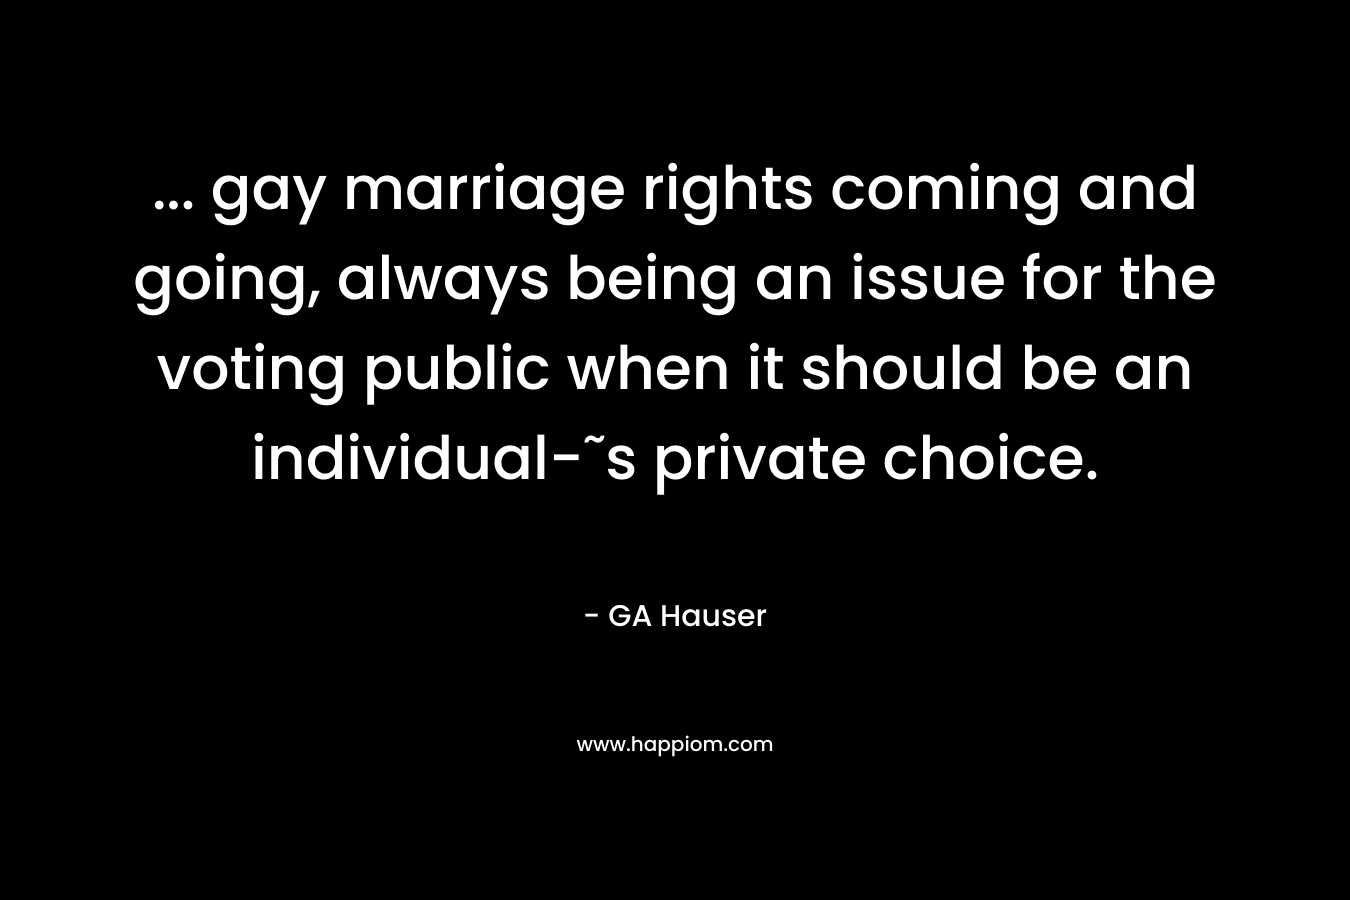 ... gay marriage rights coming and going, always being an issue for the voting public when it should be an individual-˜s private choice.